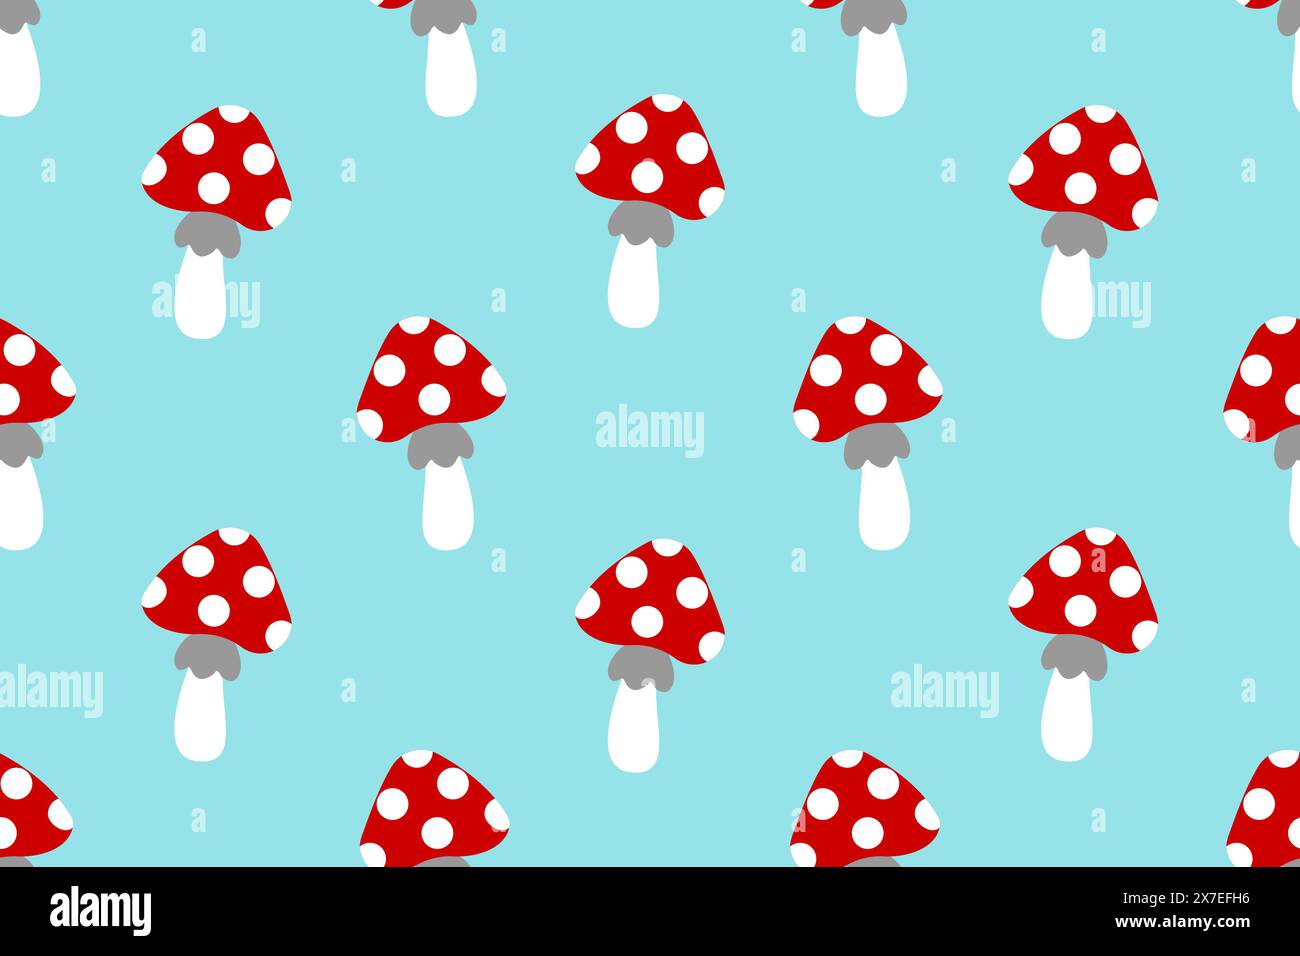 Cartoon pattern with fly agarics. Autumn mushroom pattern. Ideal for childrens projects, holiday cards, packaging, textiles and many other designs. Ve Stock Vector